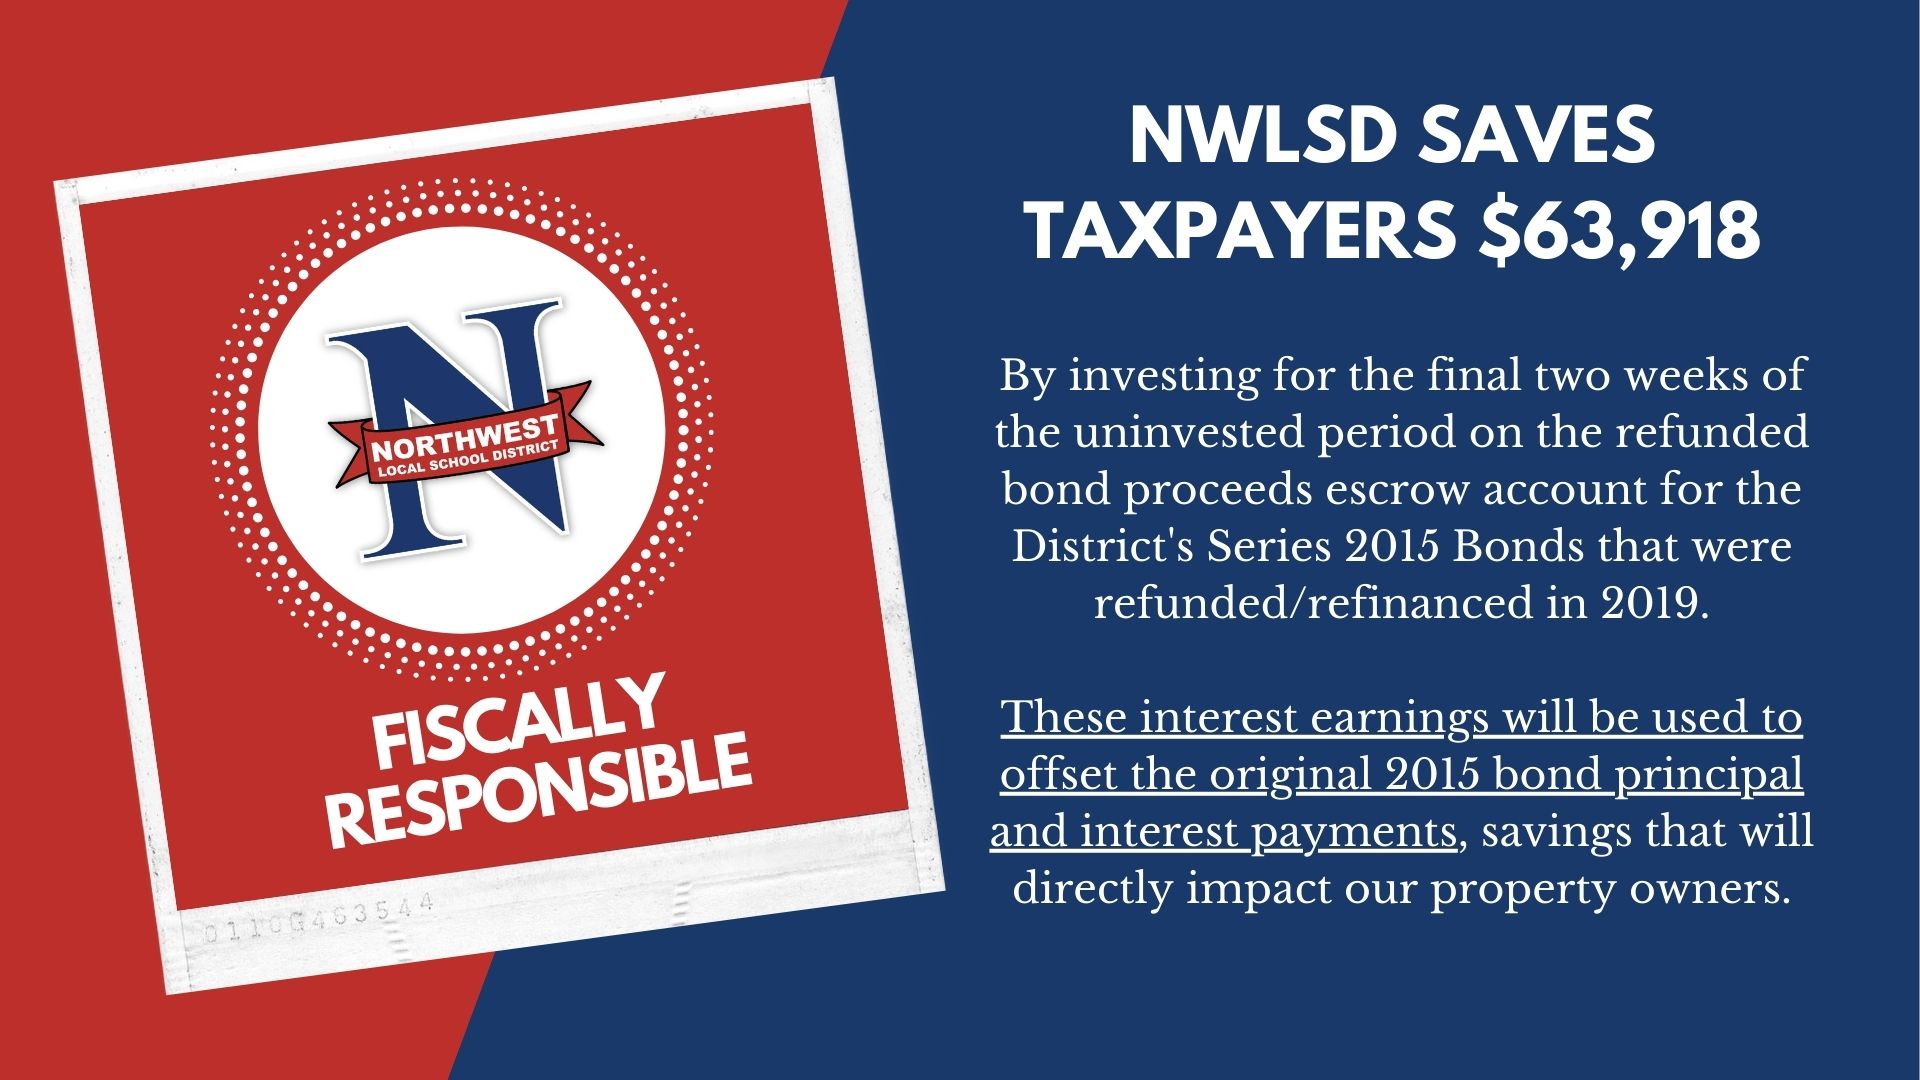 NWLSD SAVES TAXPAYERS $63,918      By investing for the final two weeks of the uninvested period on the refunded bond proceeds escrow account for the District's Series 2015 Bonds that were refunded/refinanced in 2019.       These interest earnings will be used to offset the original 2015 bond principal and interest payments, savings that will directly impact our property owners.